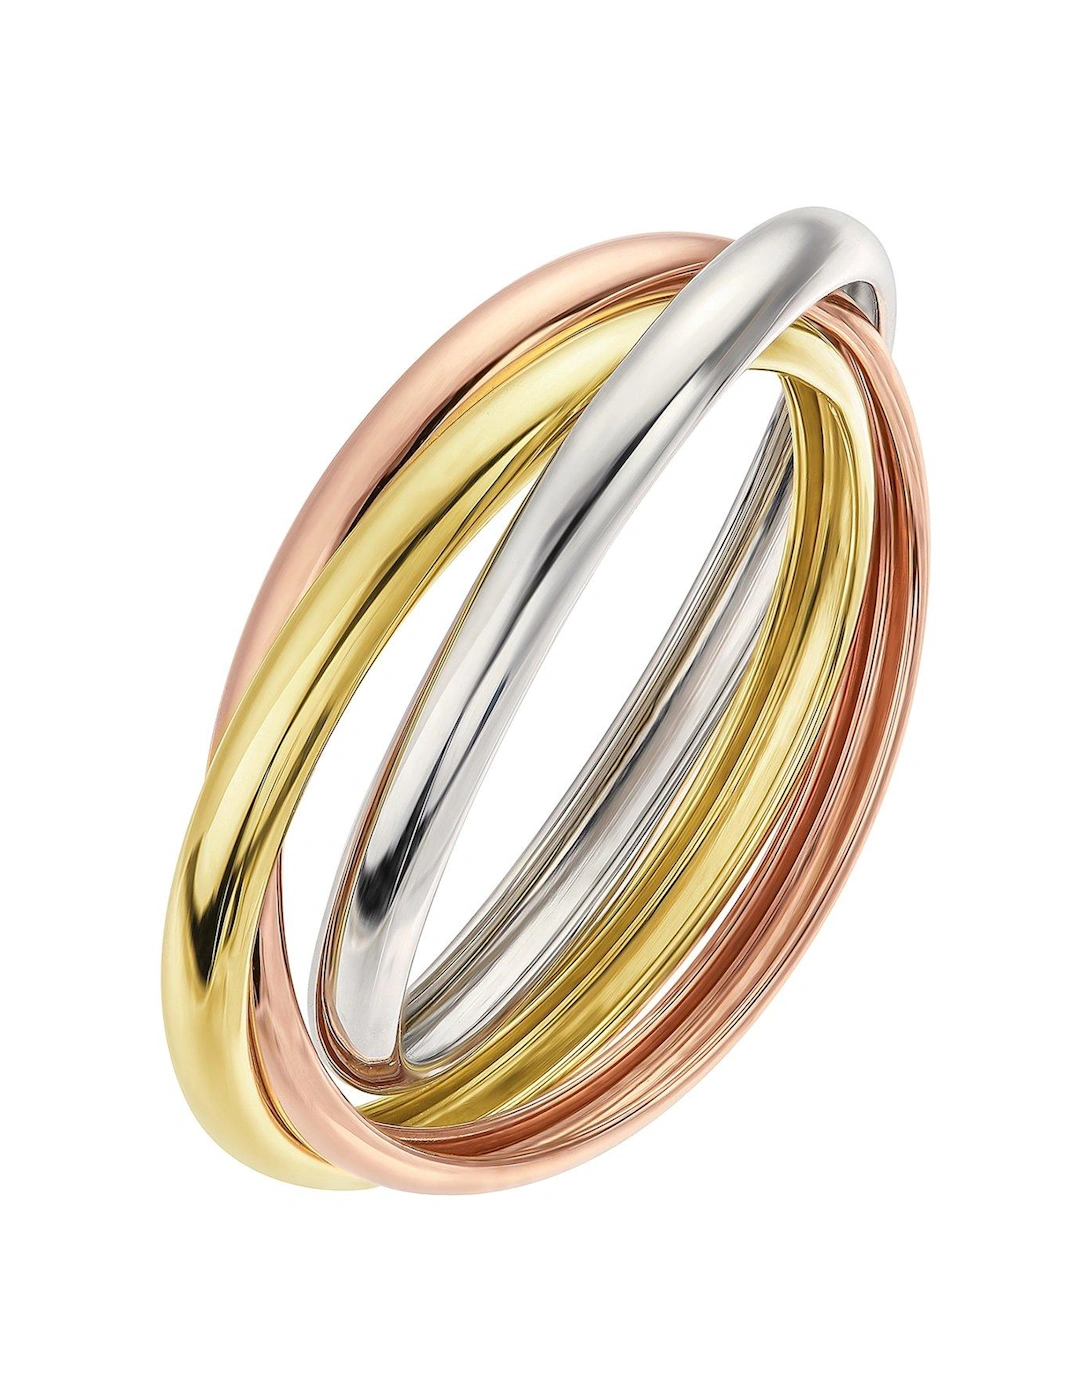 9-Carat Gold Russian 3-Colour Wedding Ring - 2mm Each band, 2 of 1